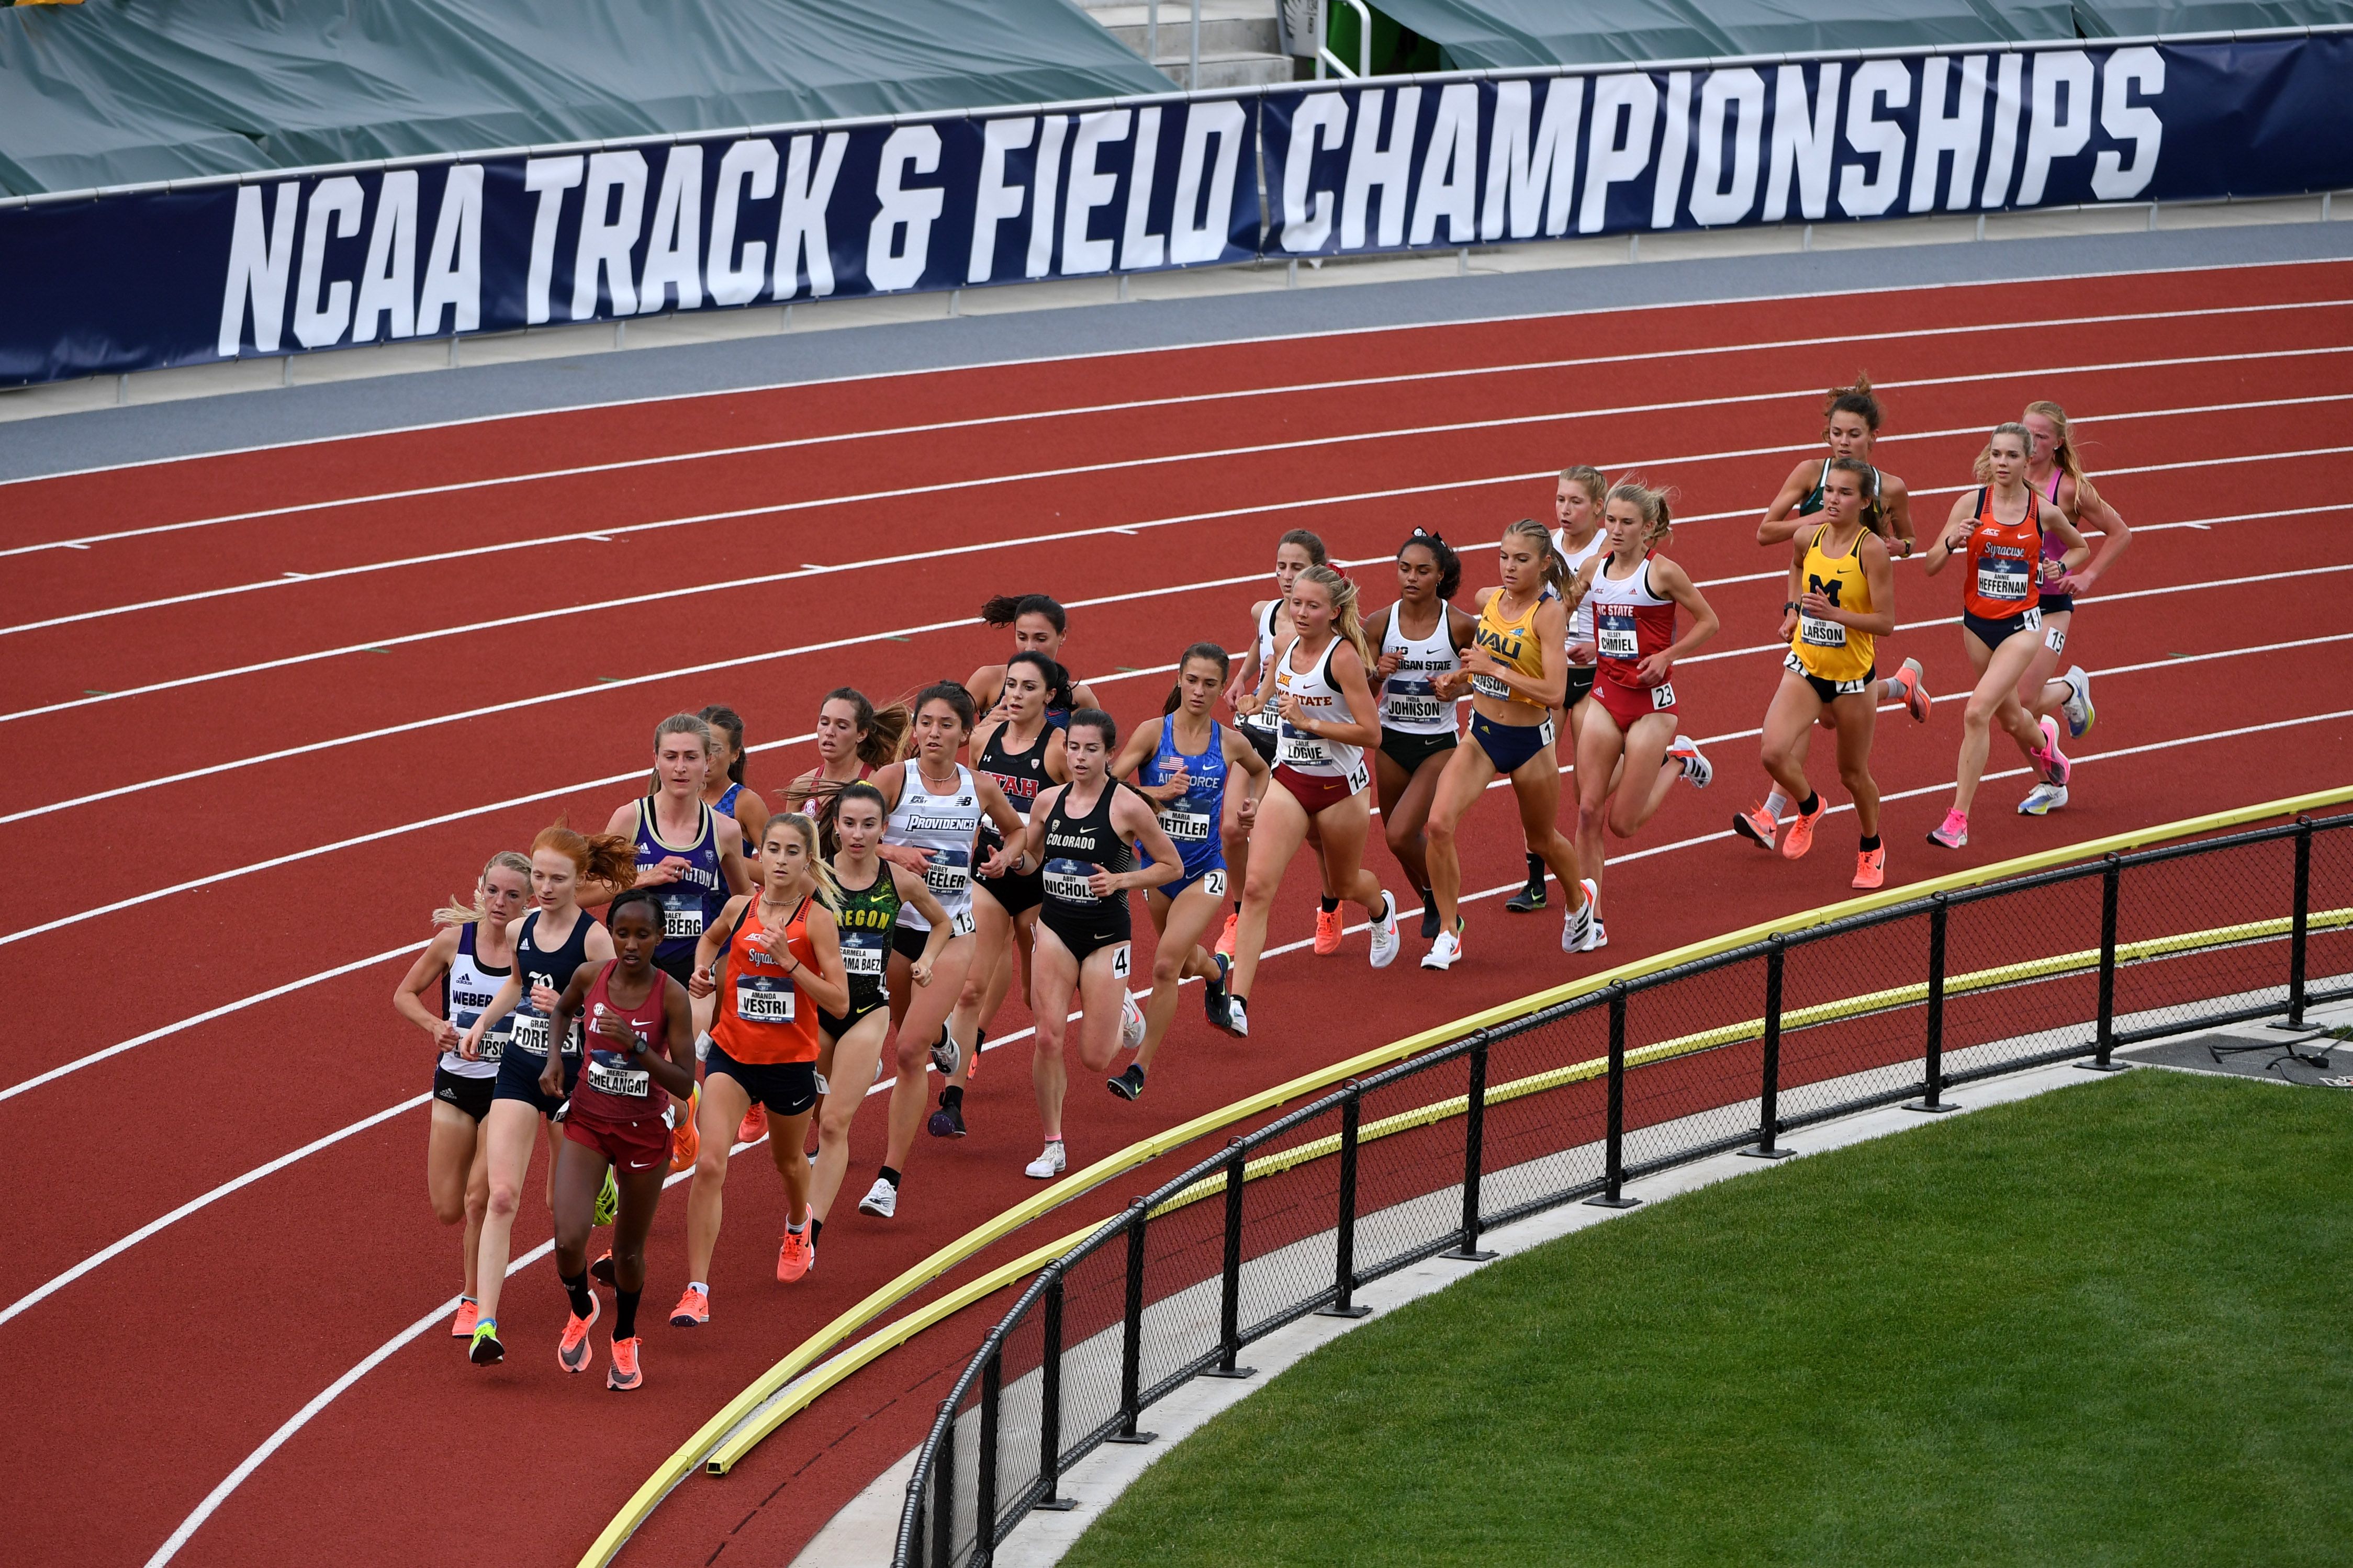 How to Watch the 2022 NCAA Outdoor Track and Field Championships